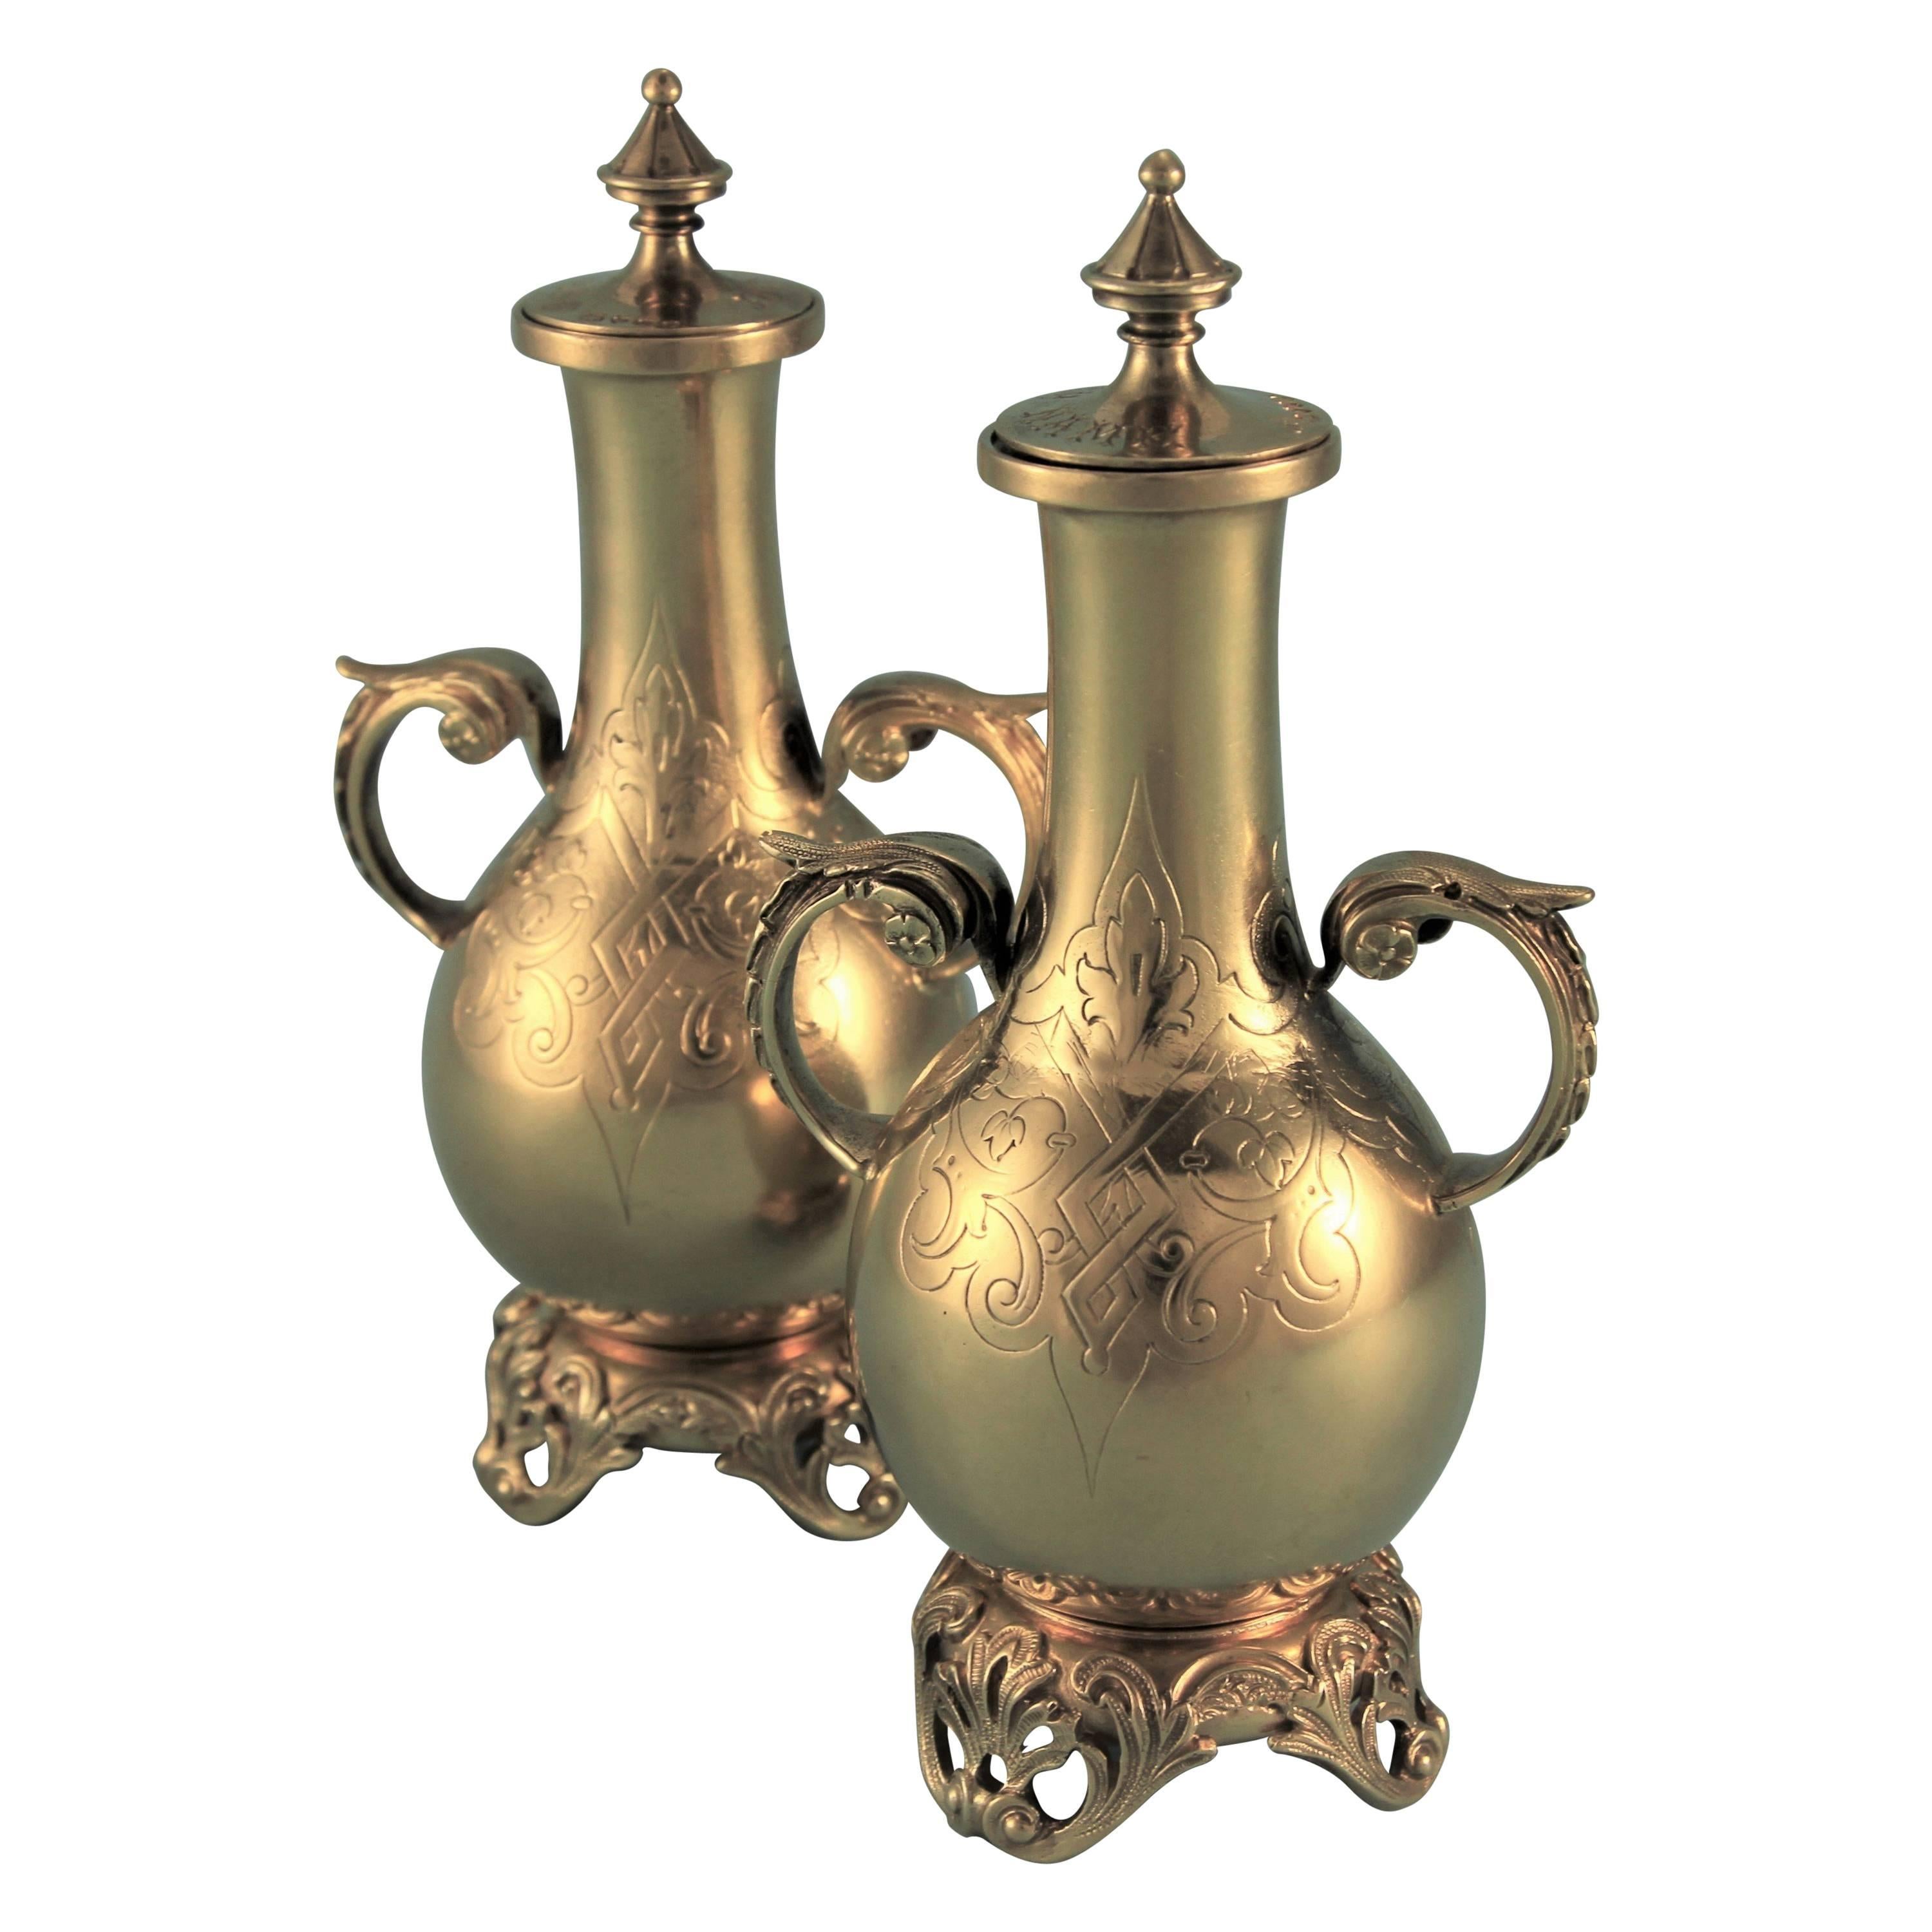 Pair of Victorian Silver Gilt Perfume Bottles on Stands, George Fox London 1871 For Sale